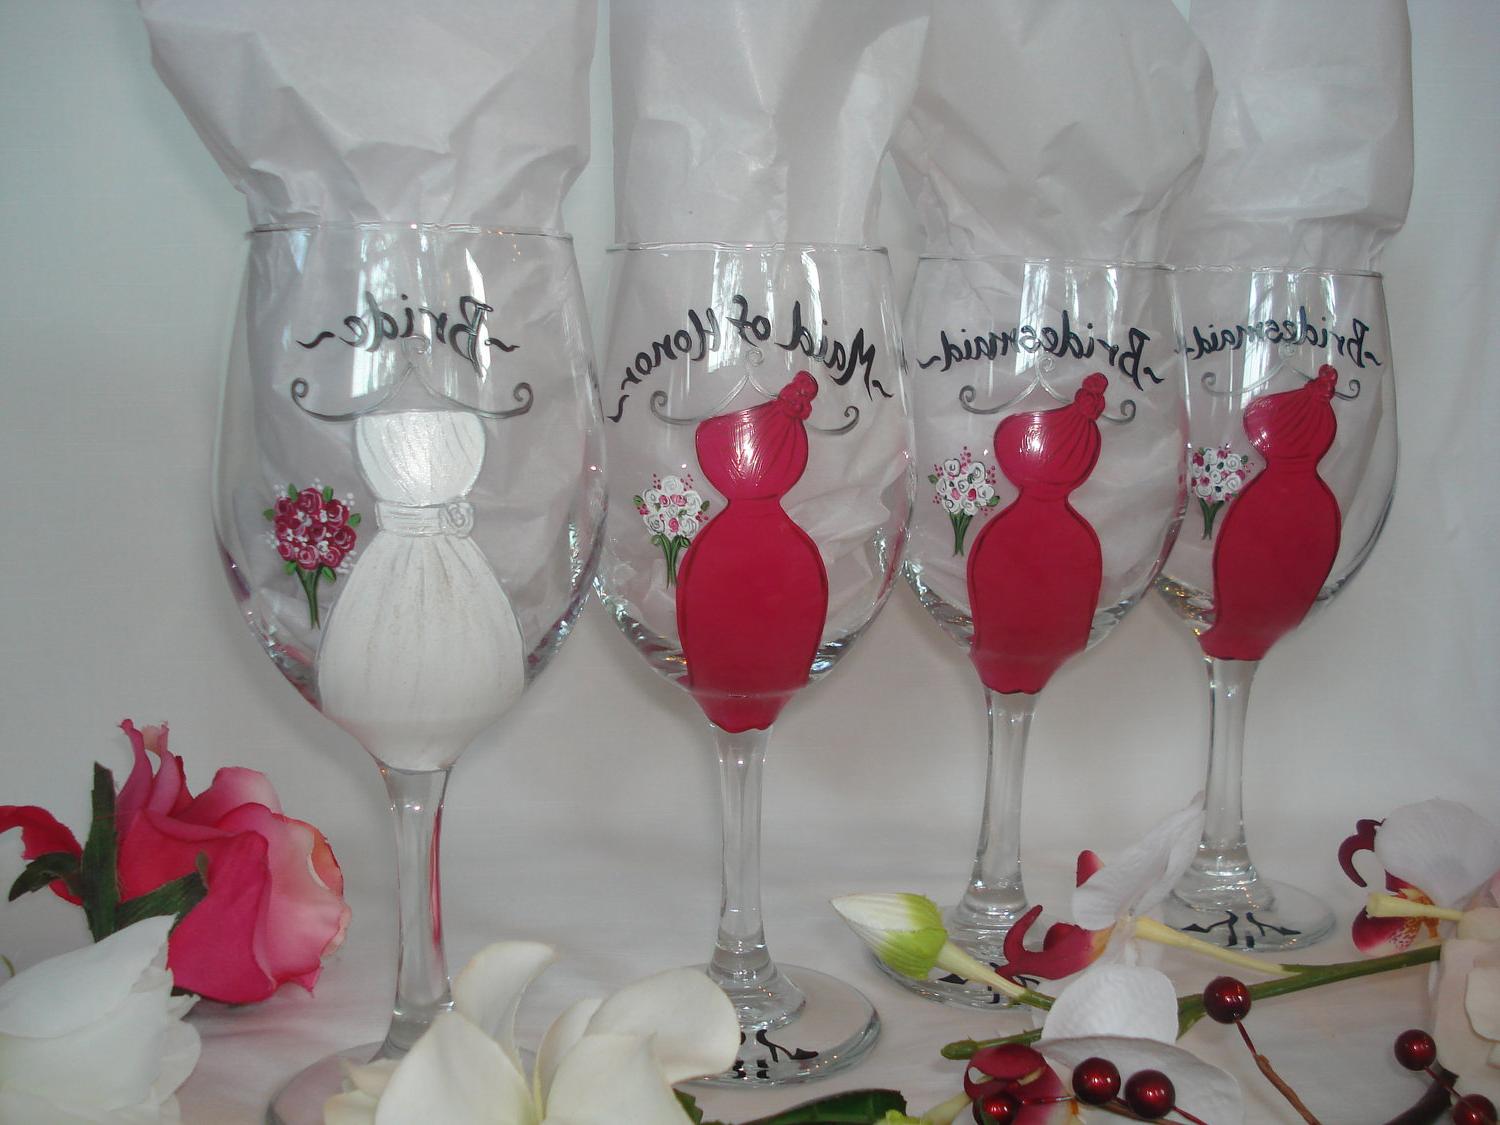 Personalized Hand Painted Bridal Party Wine Glasses - Set of 4 - Gift